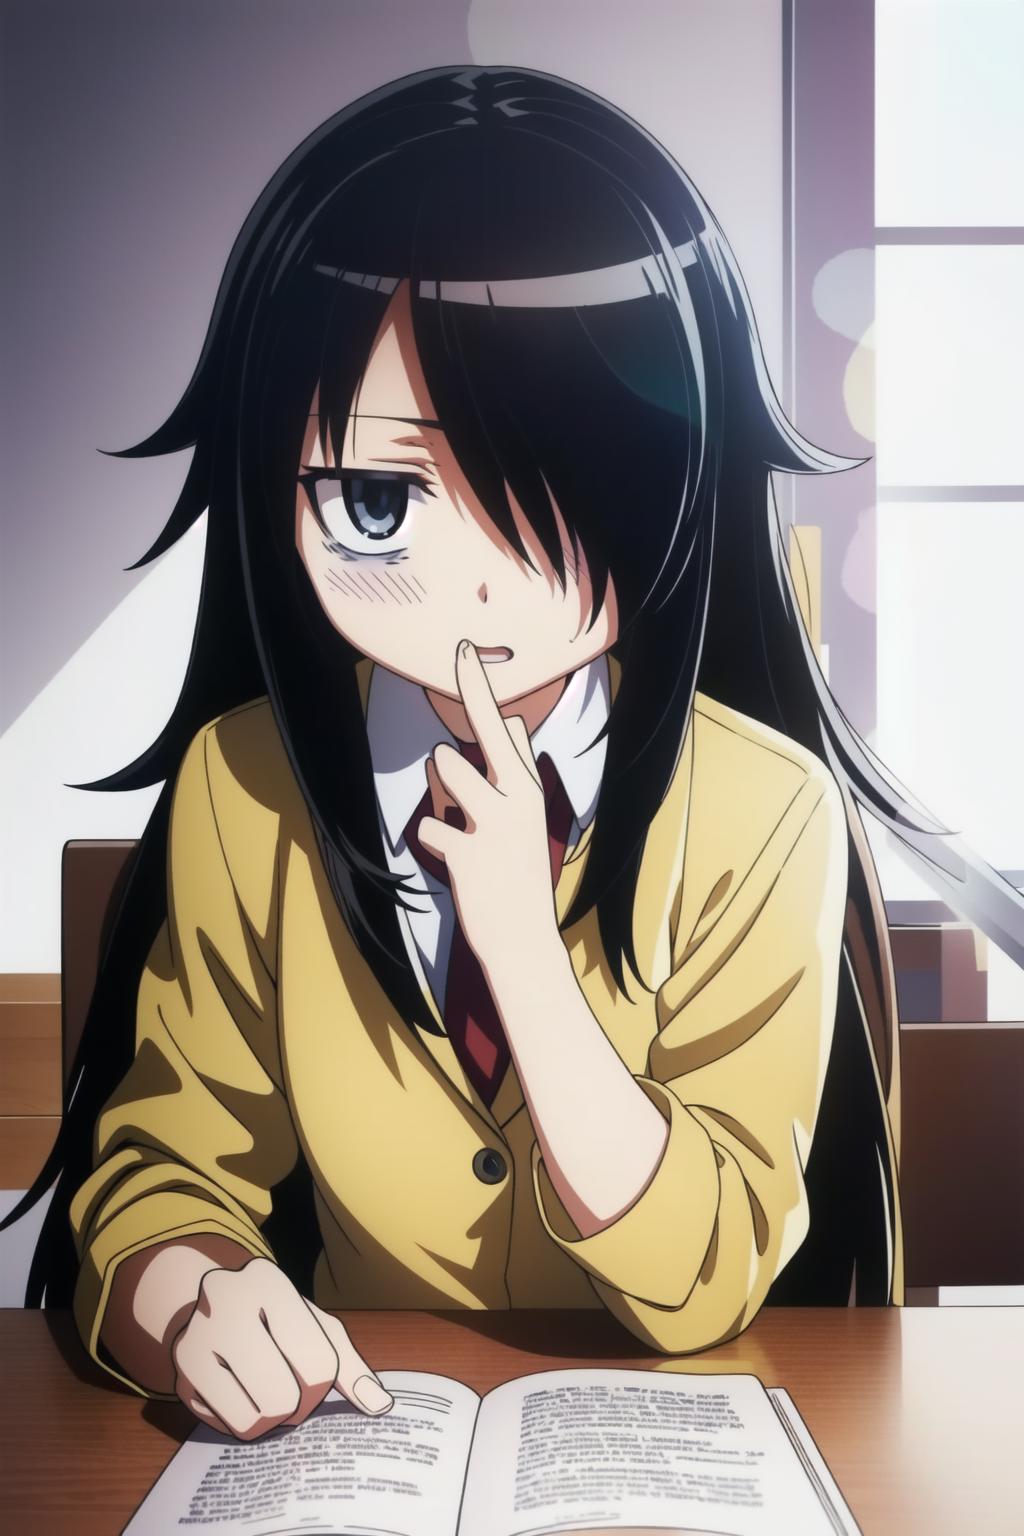 Watamote (Unpopular Girl) | Who Cares About Anime